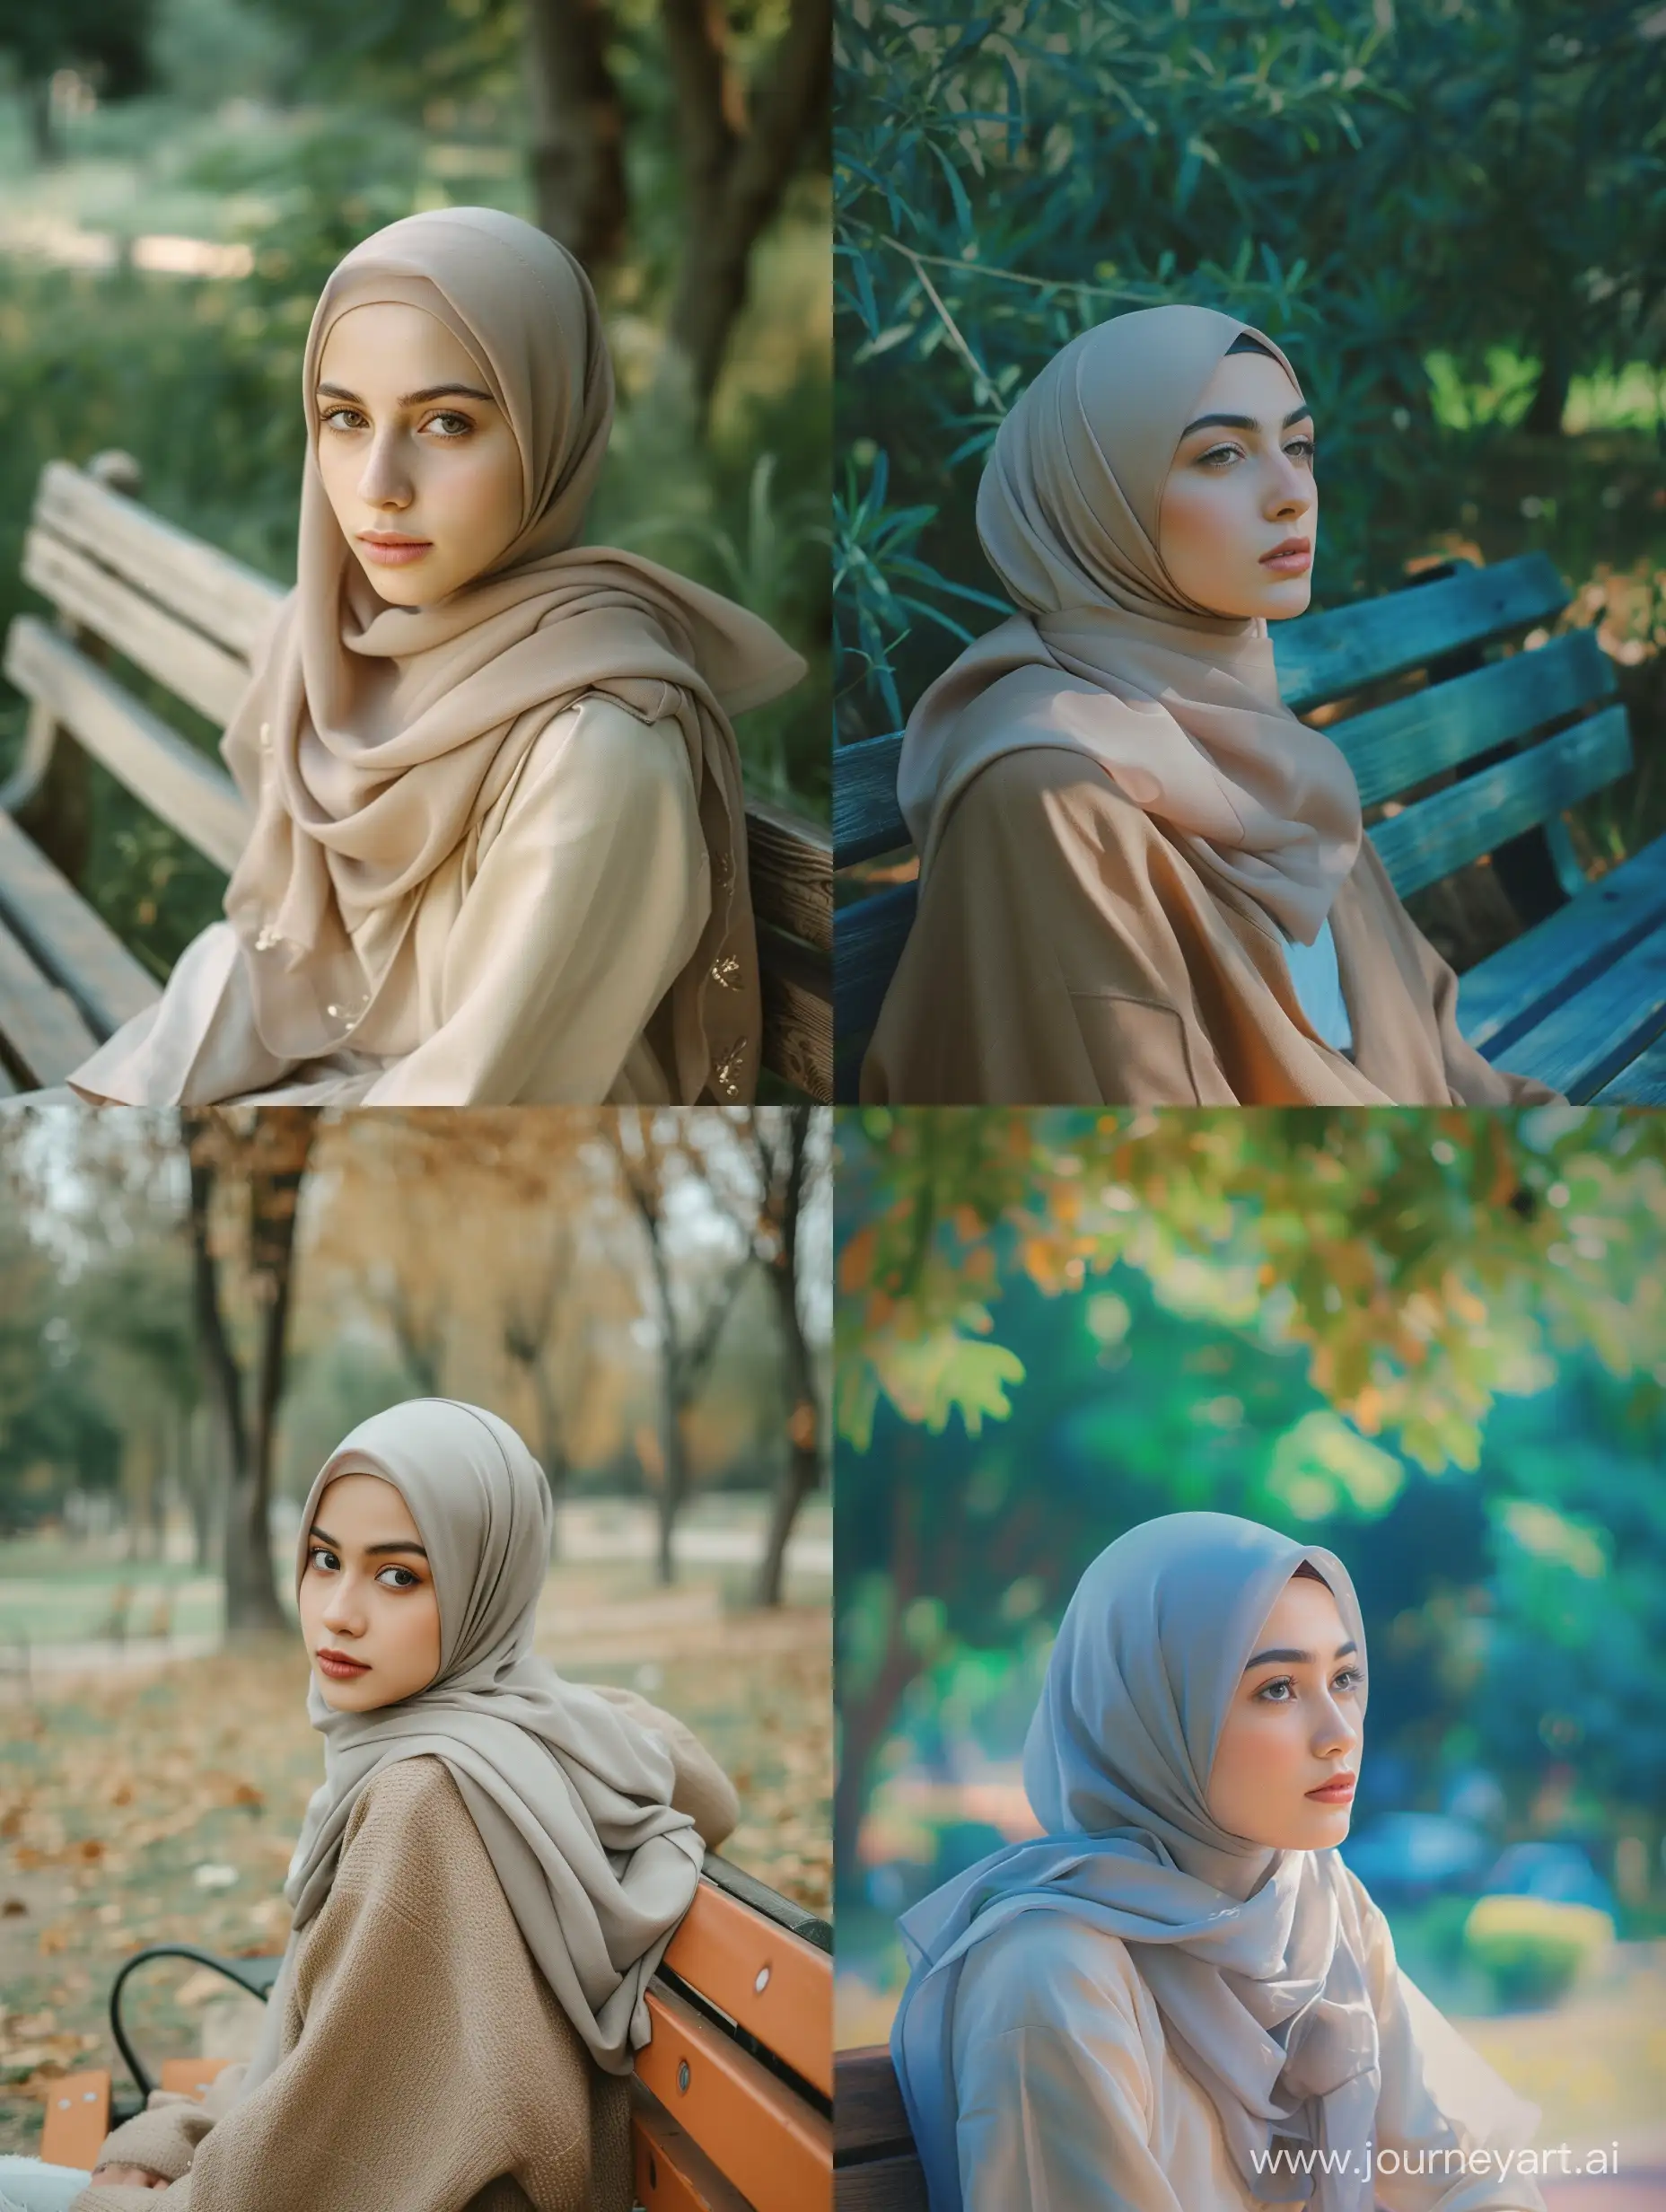 A young woman in hijab sitting alone on a bench at a park, painted with soft pastel colors, contemplative facial expression, captured with a vintage film camera for a nostalgic feel, tranquil nature scene.